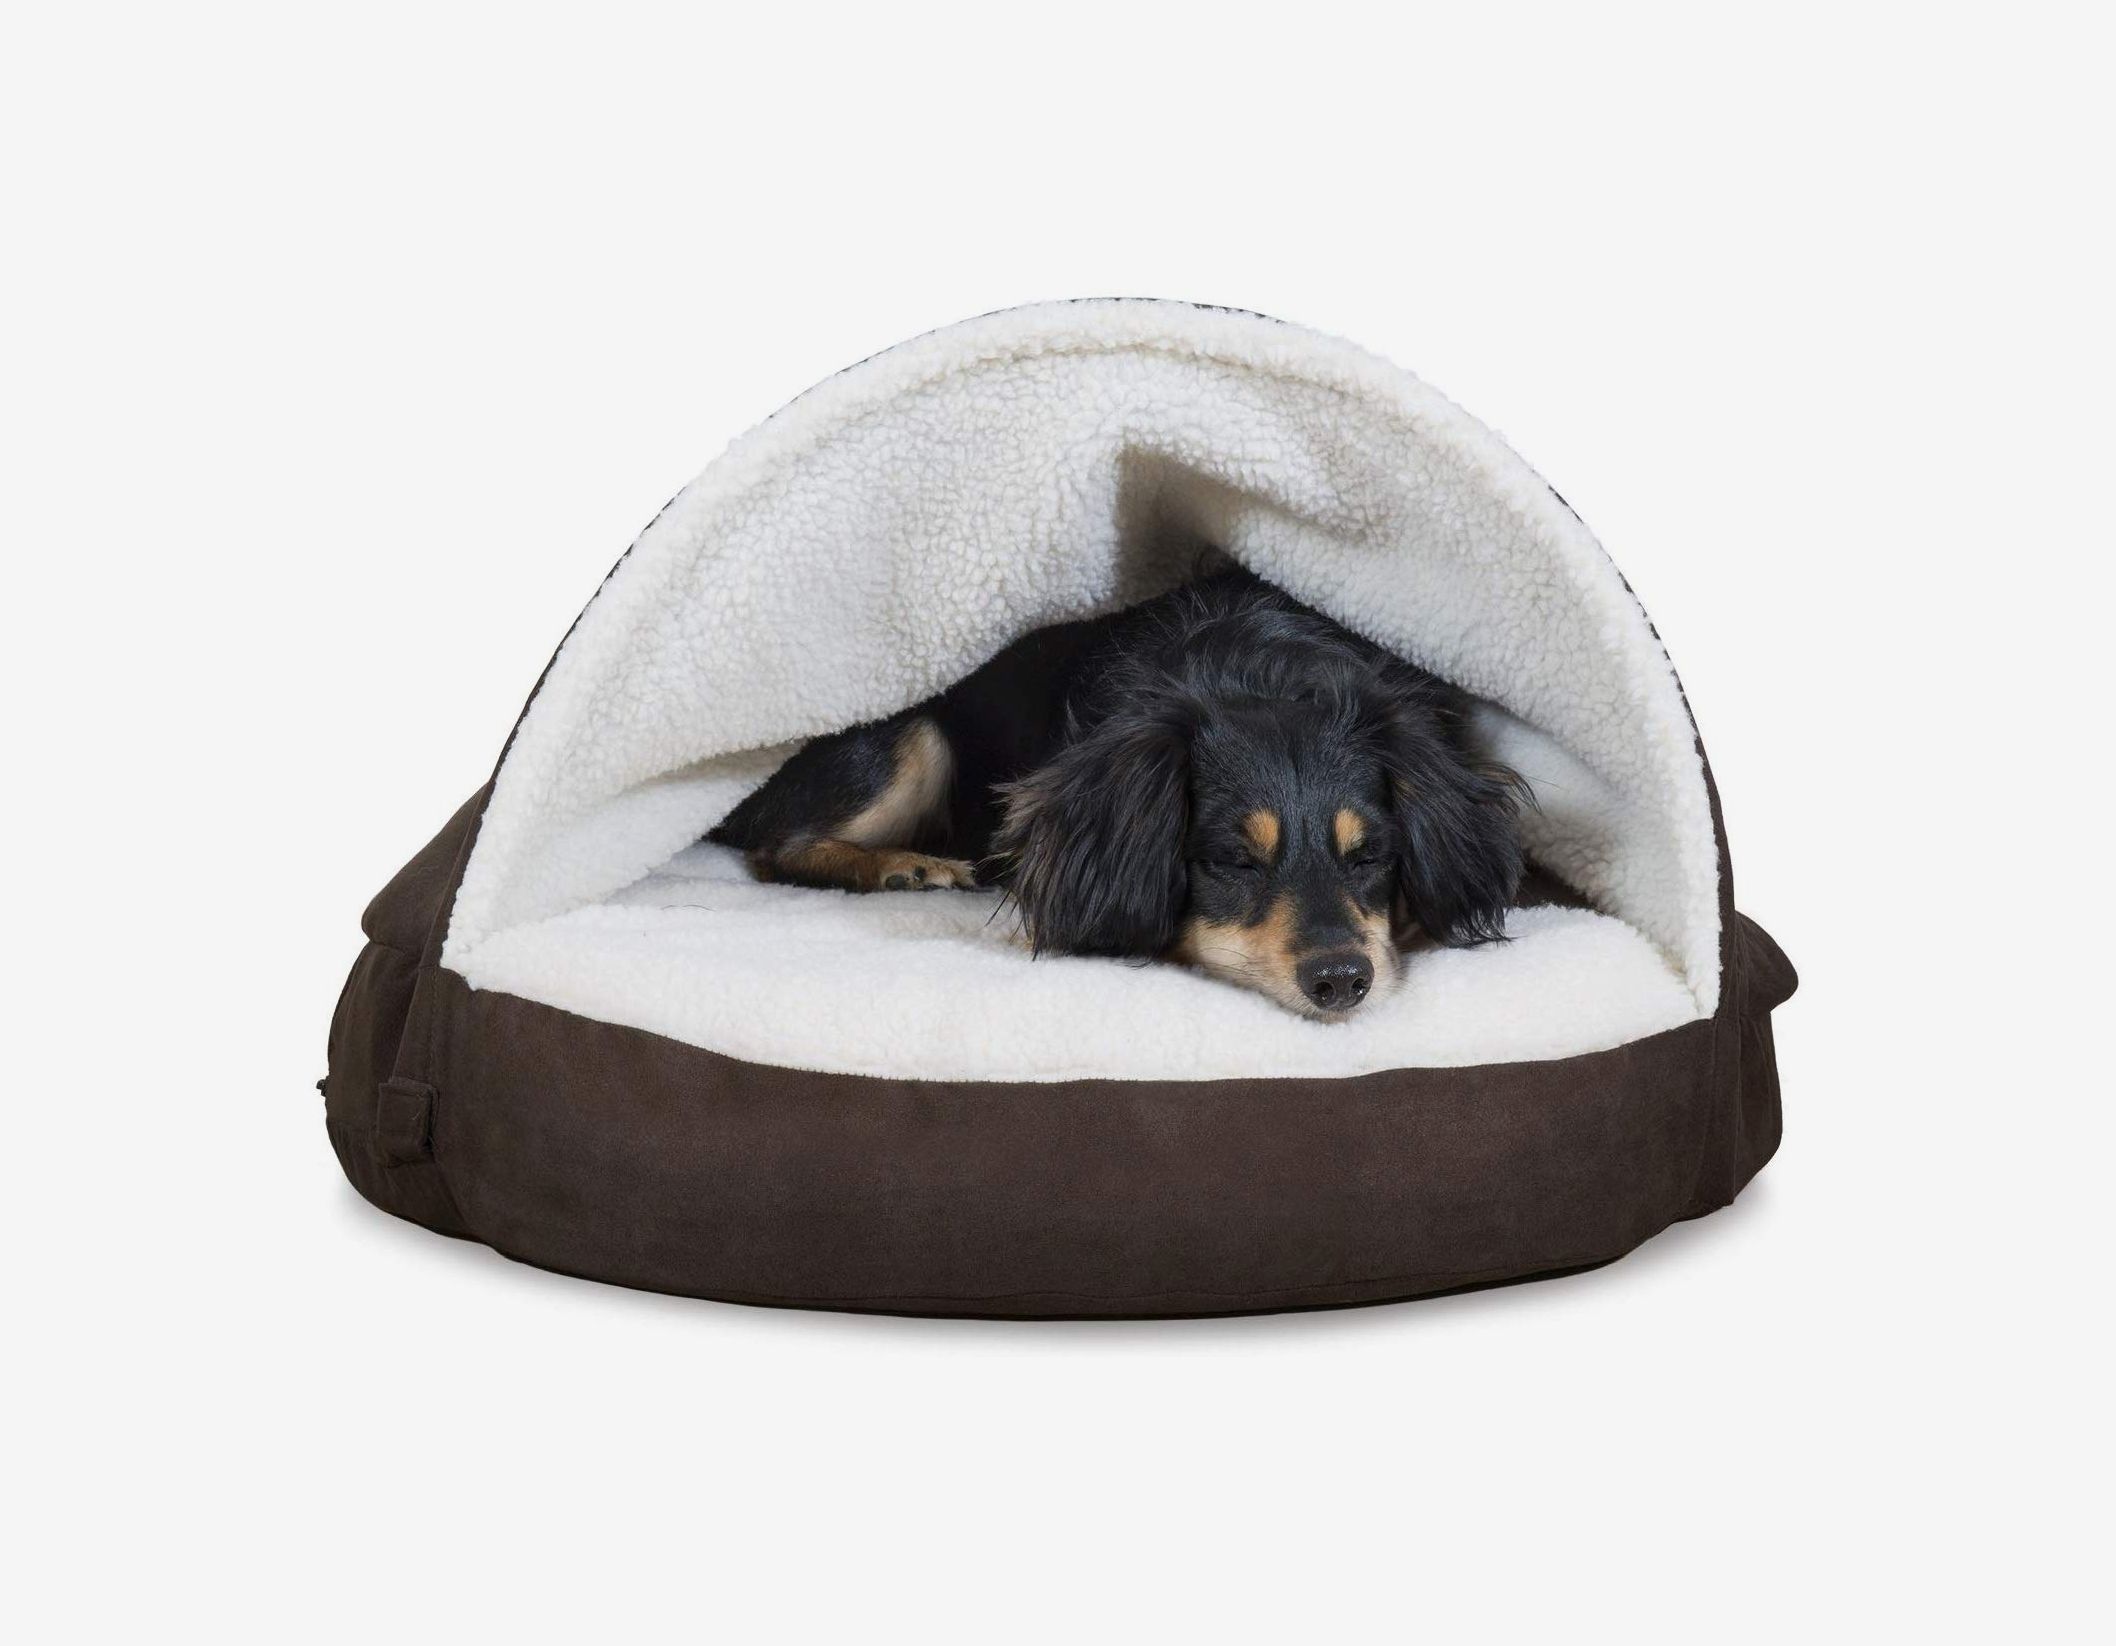 10 Ways to Make Your bed for dog Easier